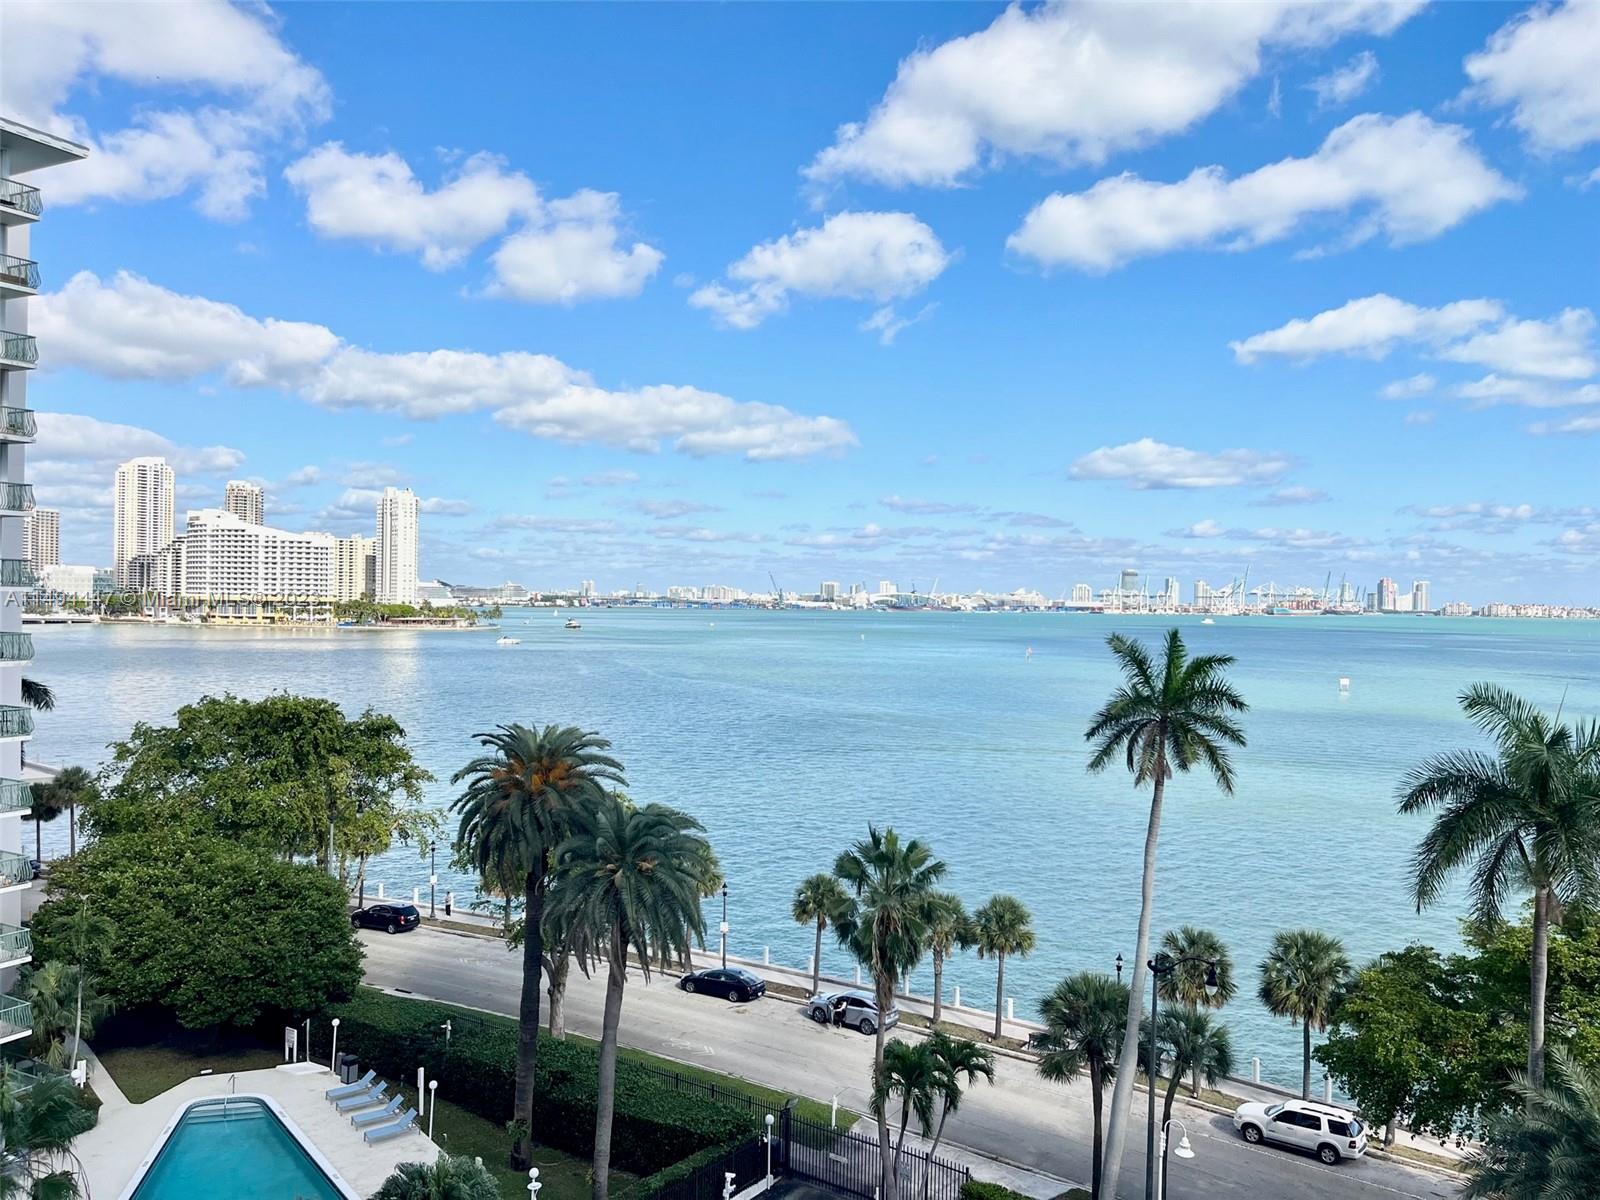 Recently renovated and meticulously maintained 2 bed / 2 bath apartment for rent at Bayshore Place. Unit feature wood floors throughout, new stainless steel appliances, granite kitchen countertop, new light fixtures, and more. Enjoy spectacular views of Biscayne Bay and the Port Of Miami from your spacious outdoor balcony area. Bayshore Place is centrally located within a short walking distance to the shops and restaurants of Mary Brickell Village and Brickell City Center. Bedrooms are oversized and offer lots of closet space. Unit also comes with private storage locker. Tenant occupied until December 15th. Easy to show.